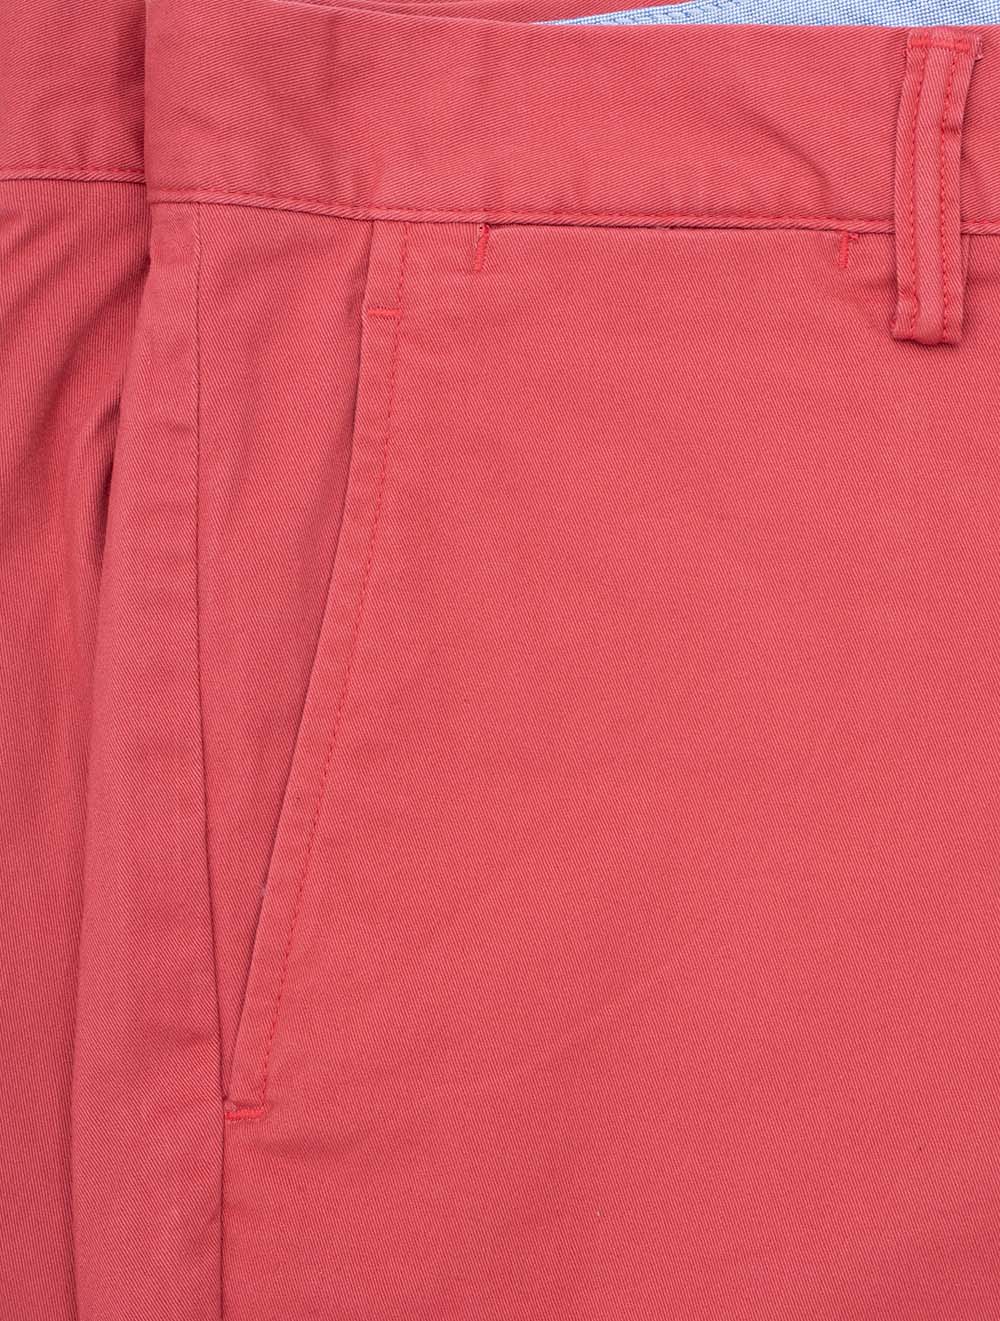 Bedford Shorts Red